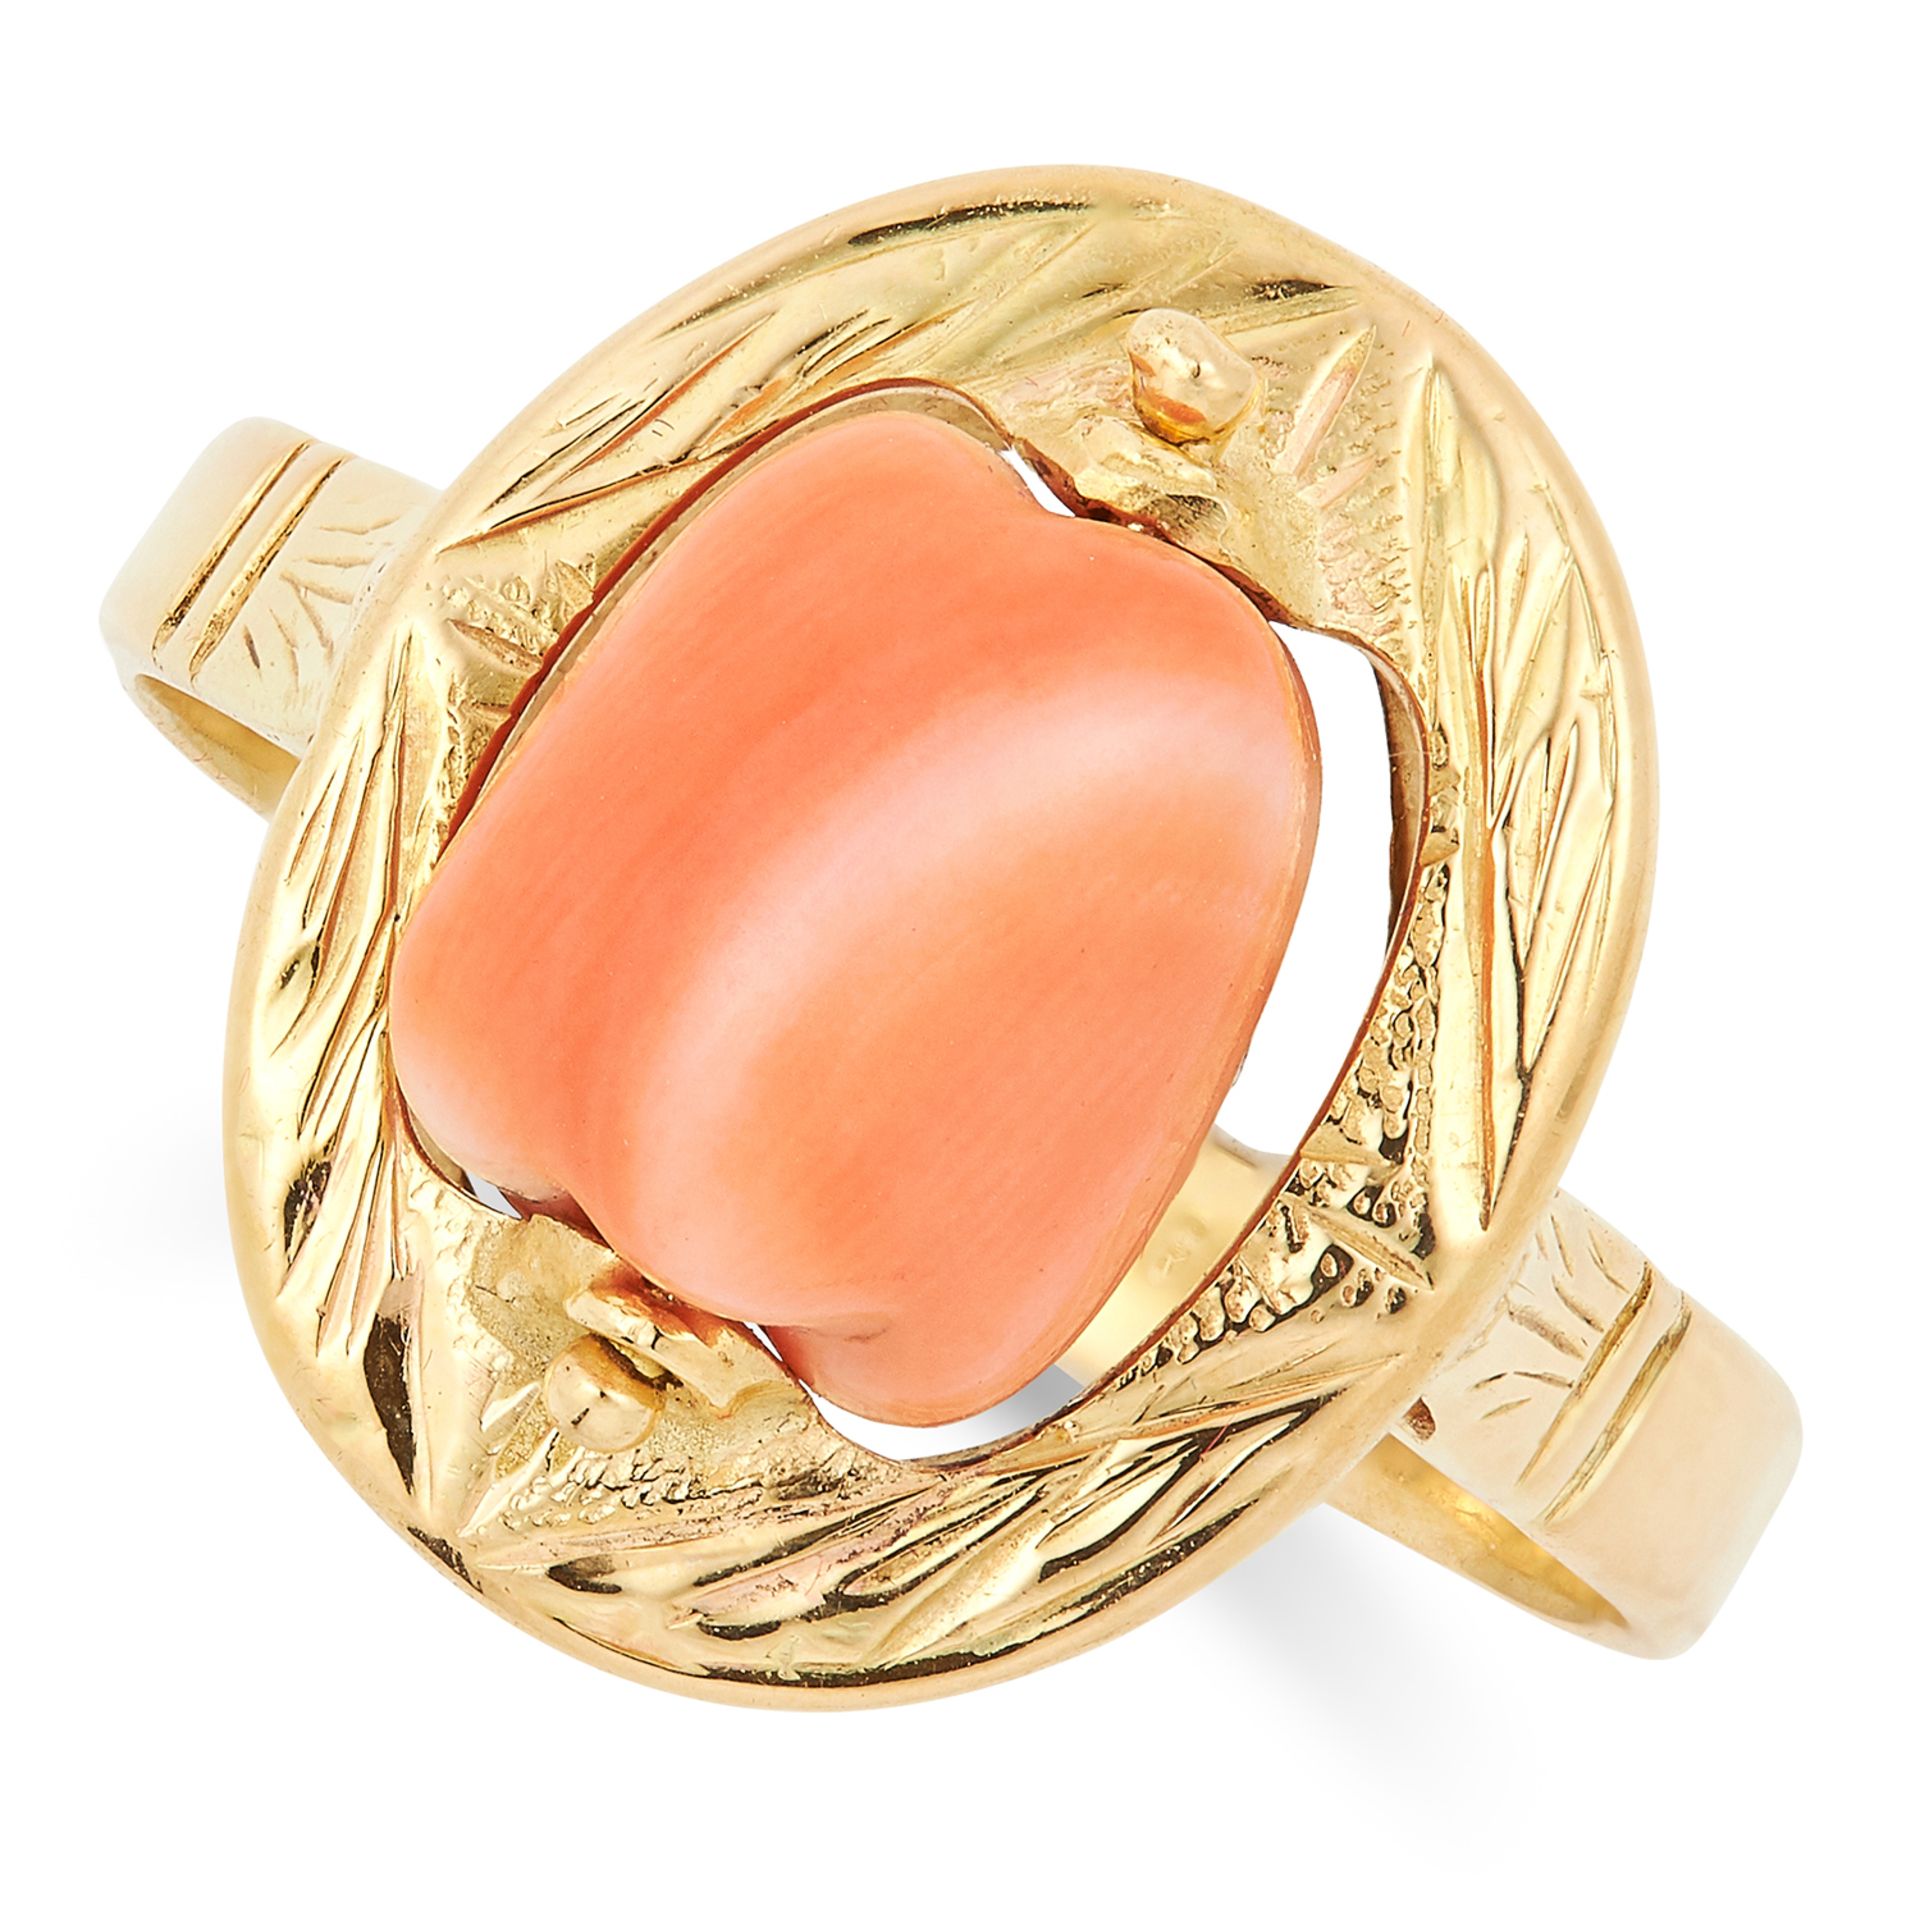 CORAL DRESS RING set with polished coral in a gold border, size S / 9, 5.2g.